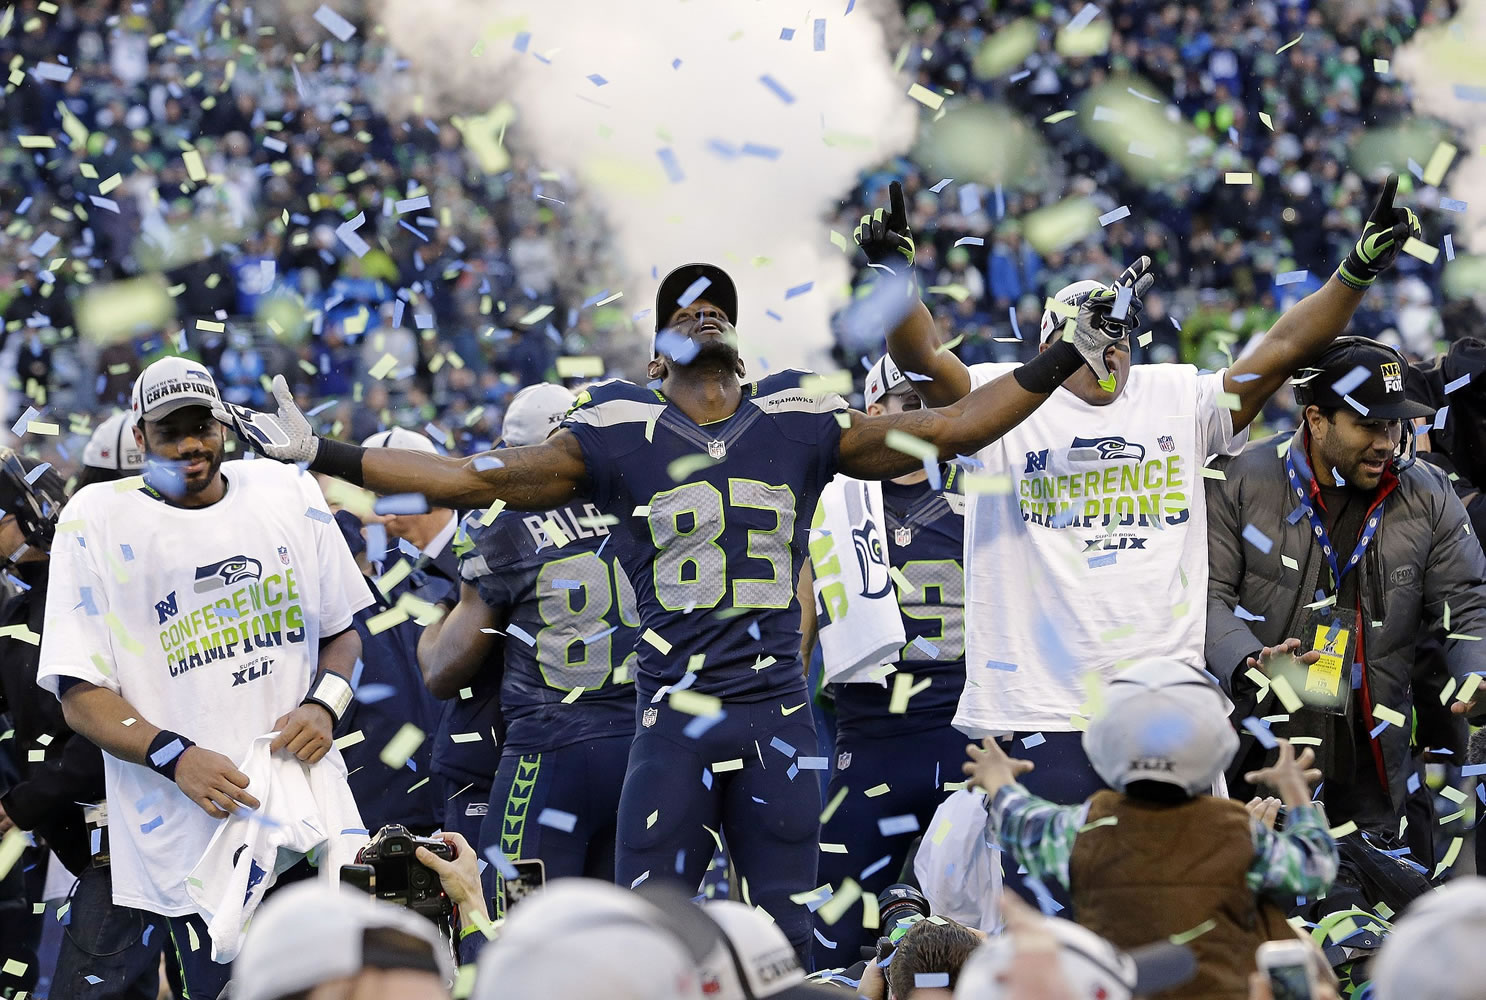 Seattle Seahawks players celebrate after winning thel NFC Championship game against the Green Bay Packers Sunday, Jan. 18, 2015, in Seattle.